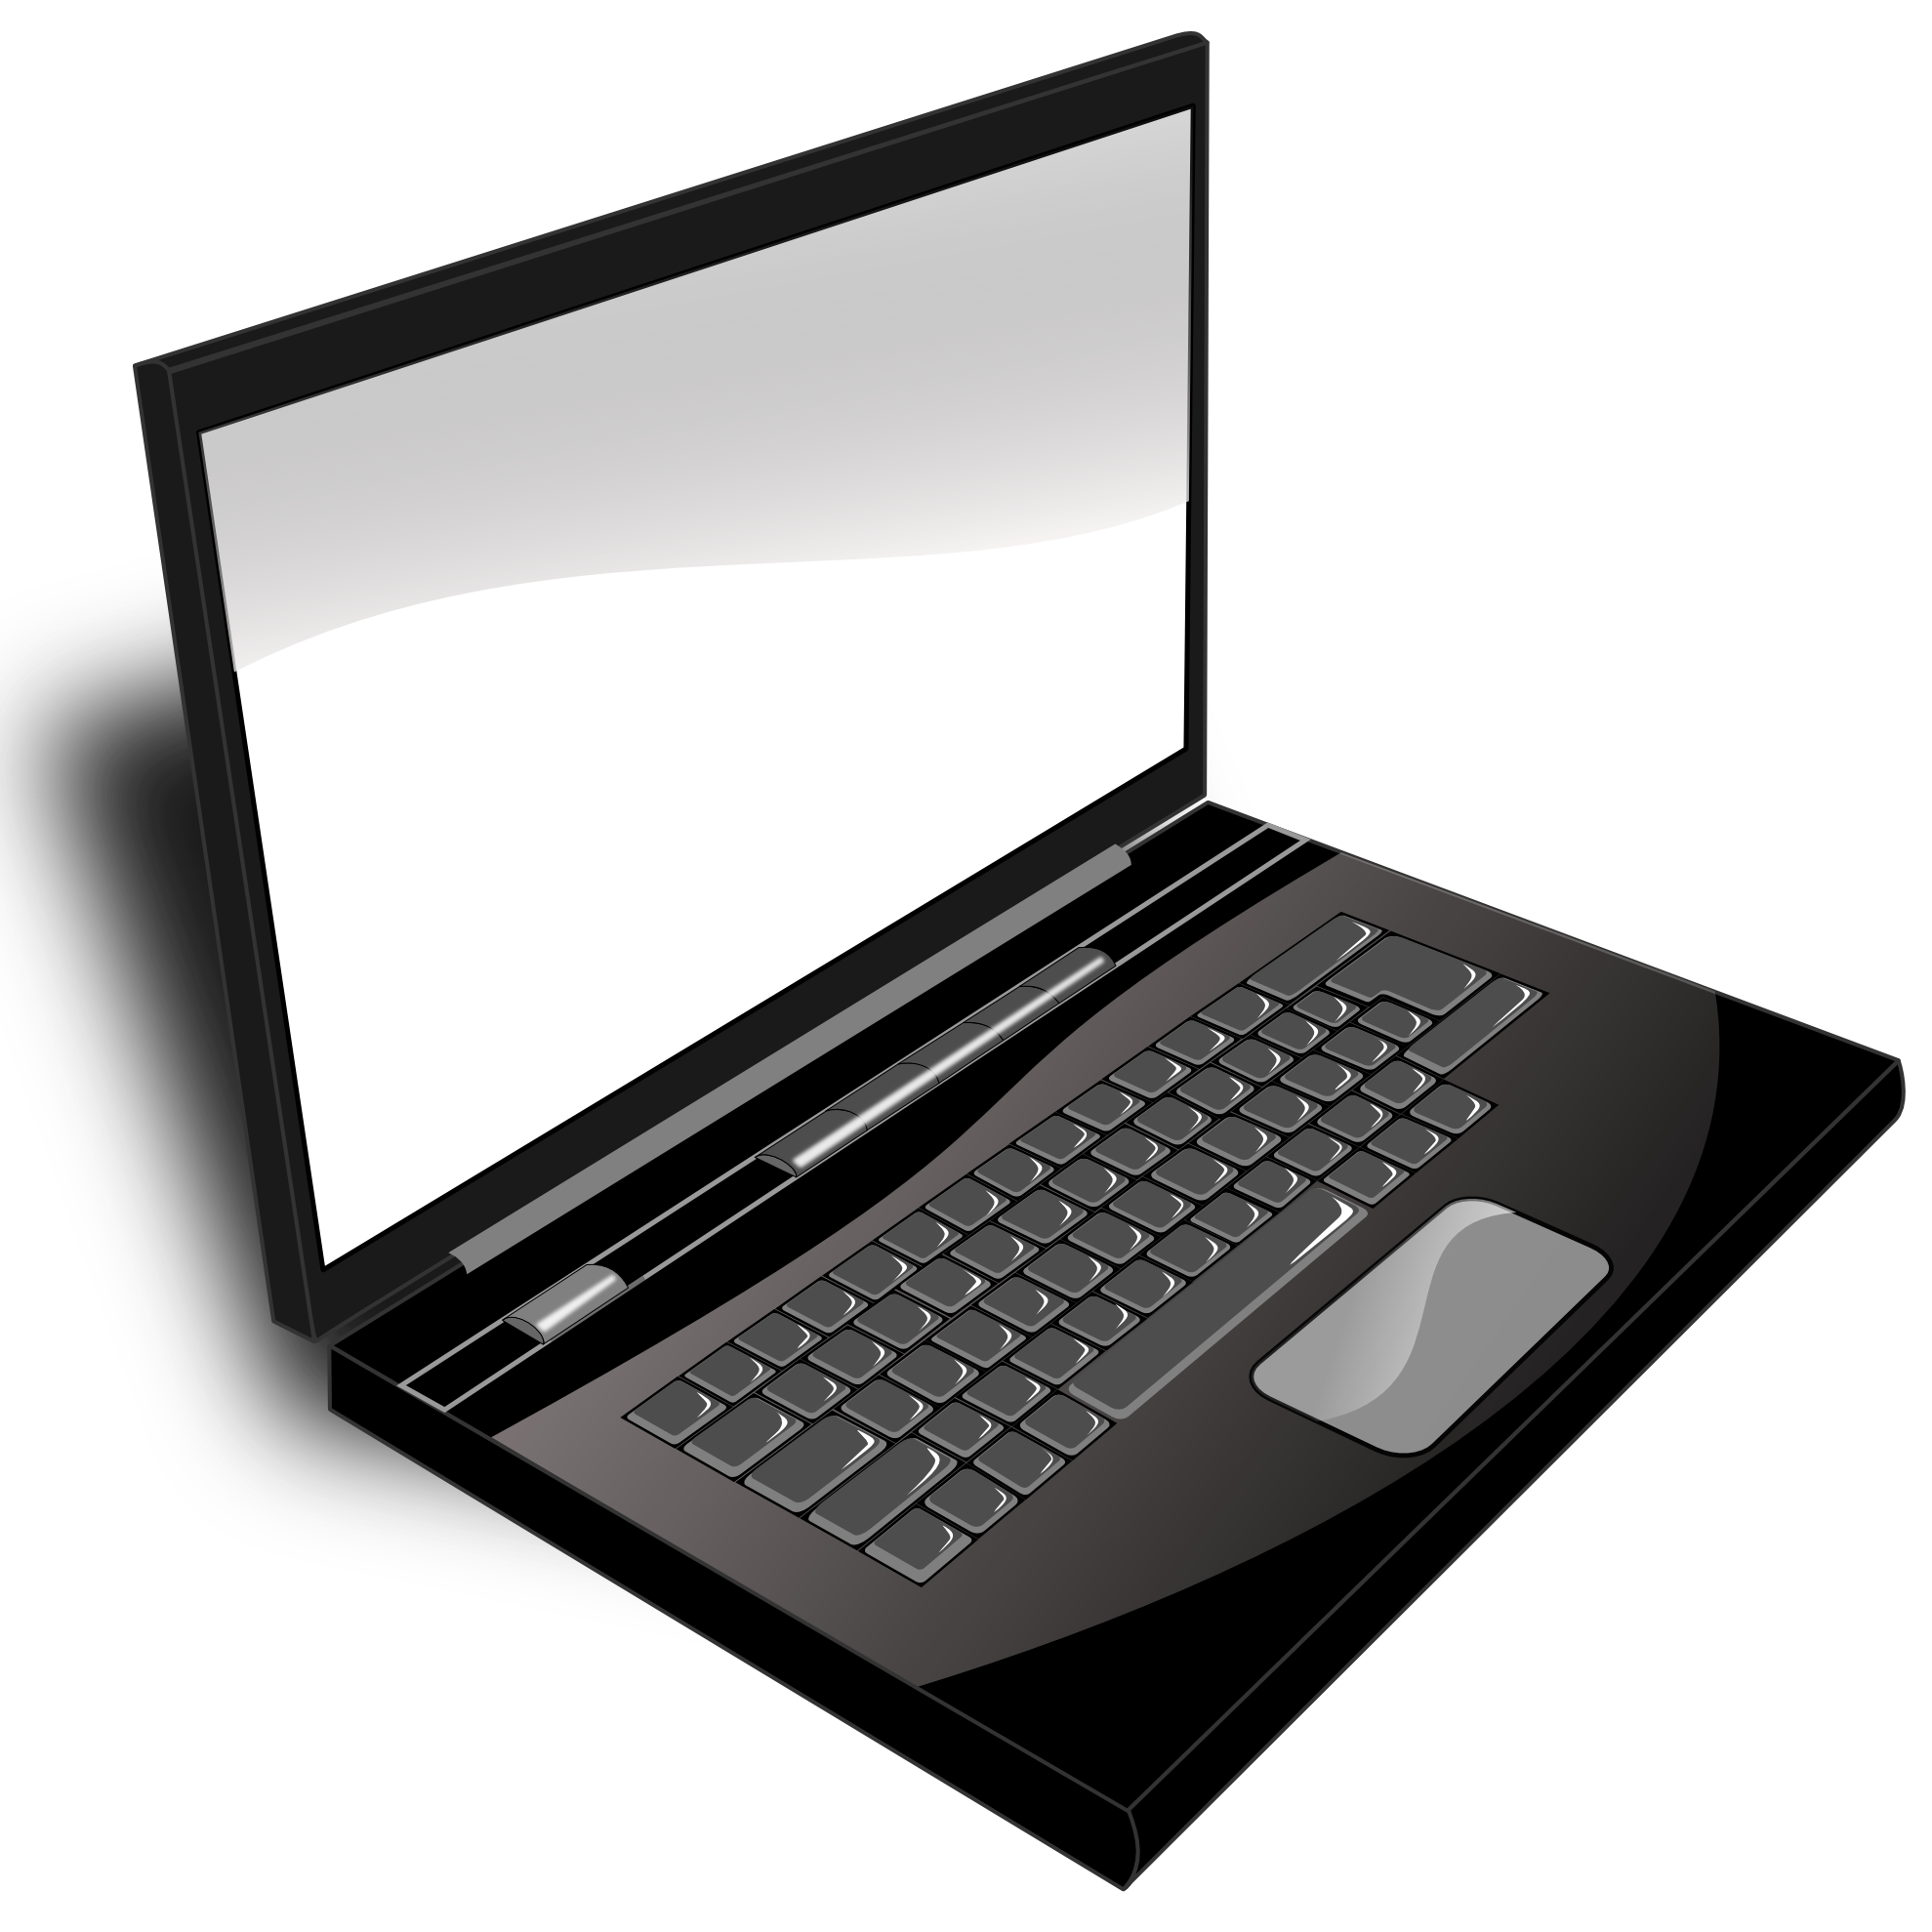 Mac Laptop Clipart Images & Pictures - Becuo